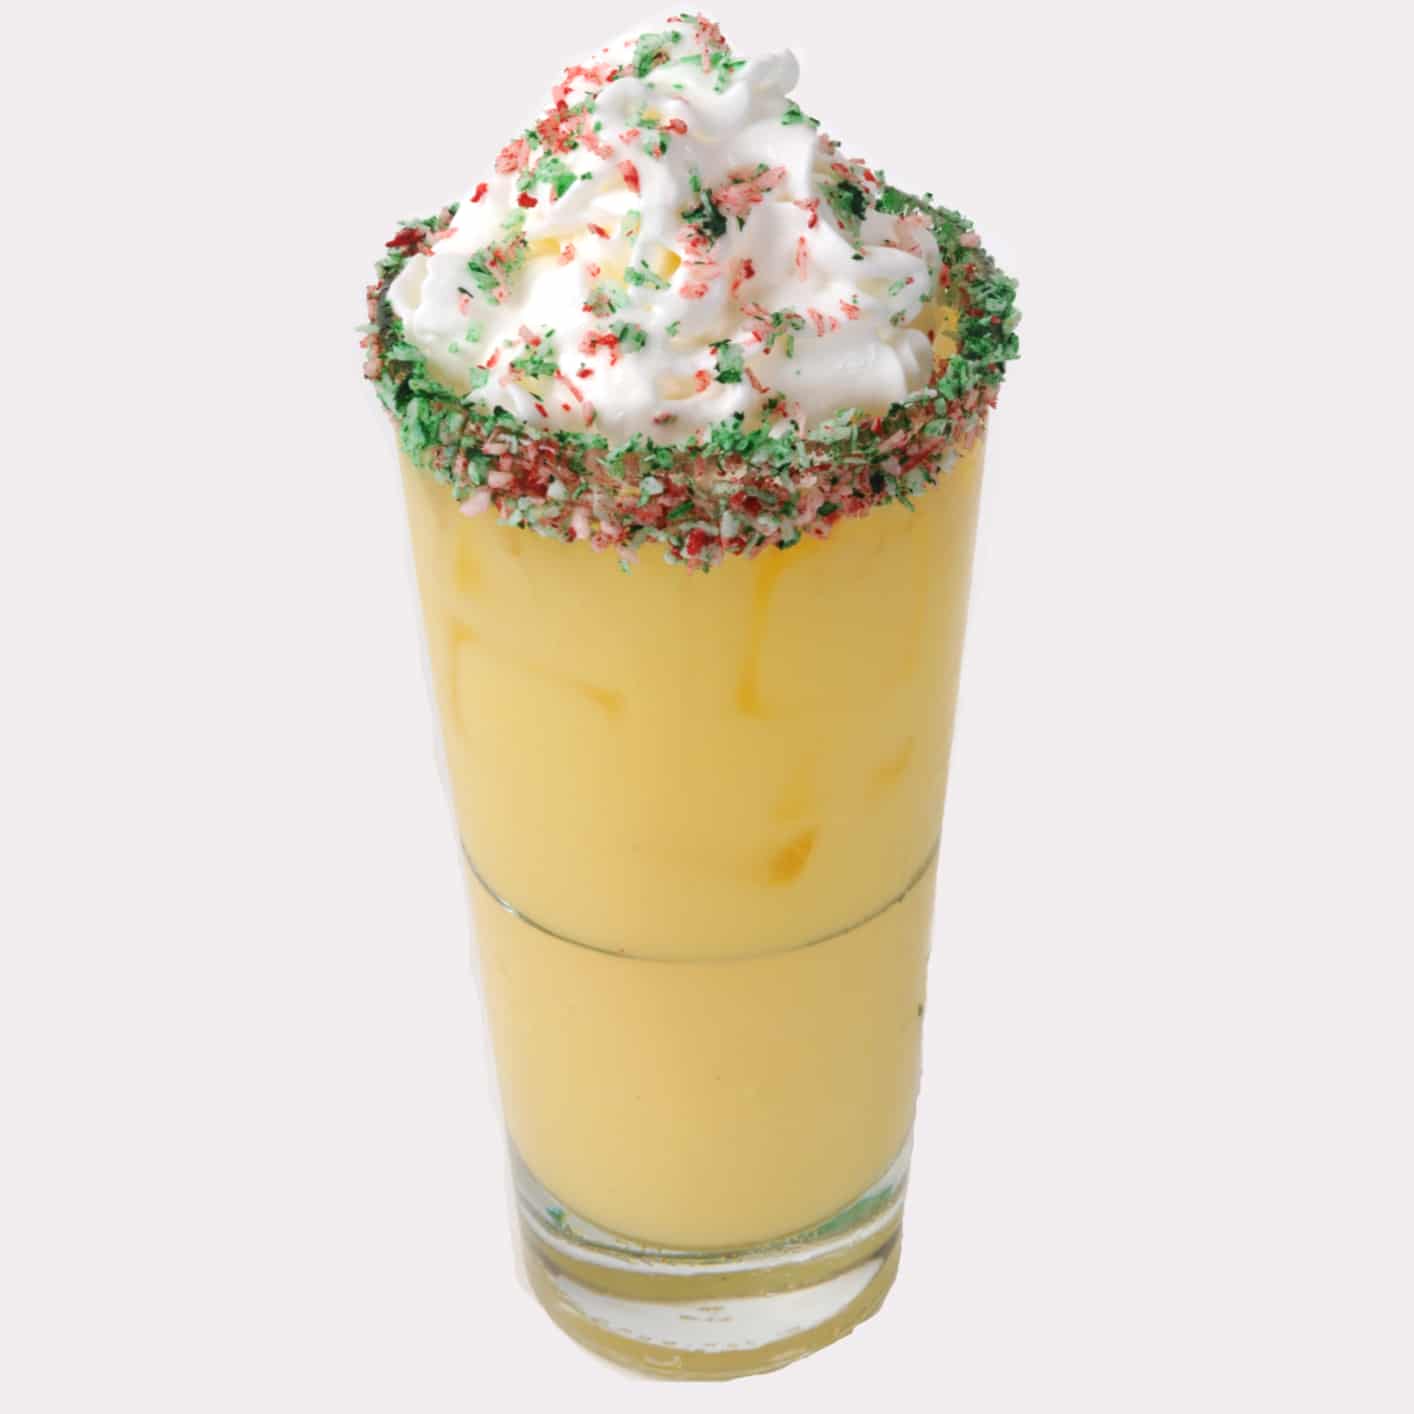 Holiday Drink Recipes: ‘Tis the SeaSon cocktail